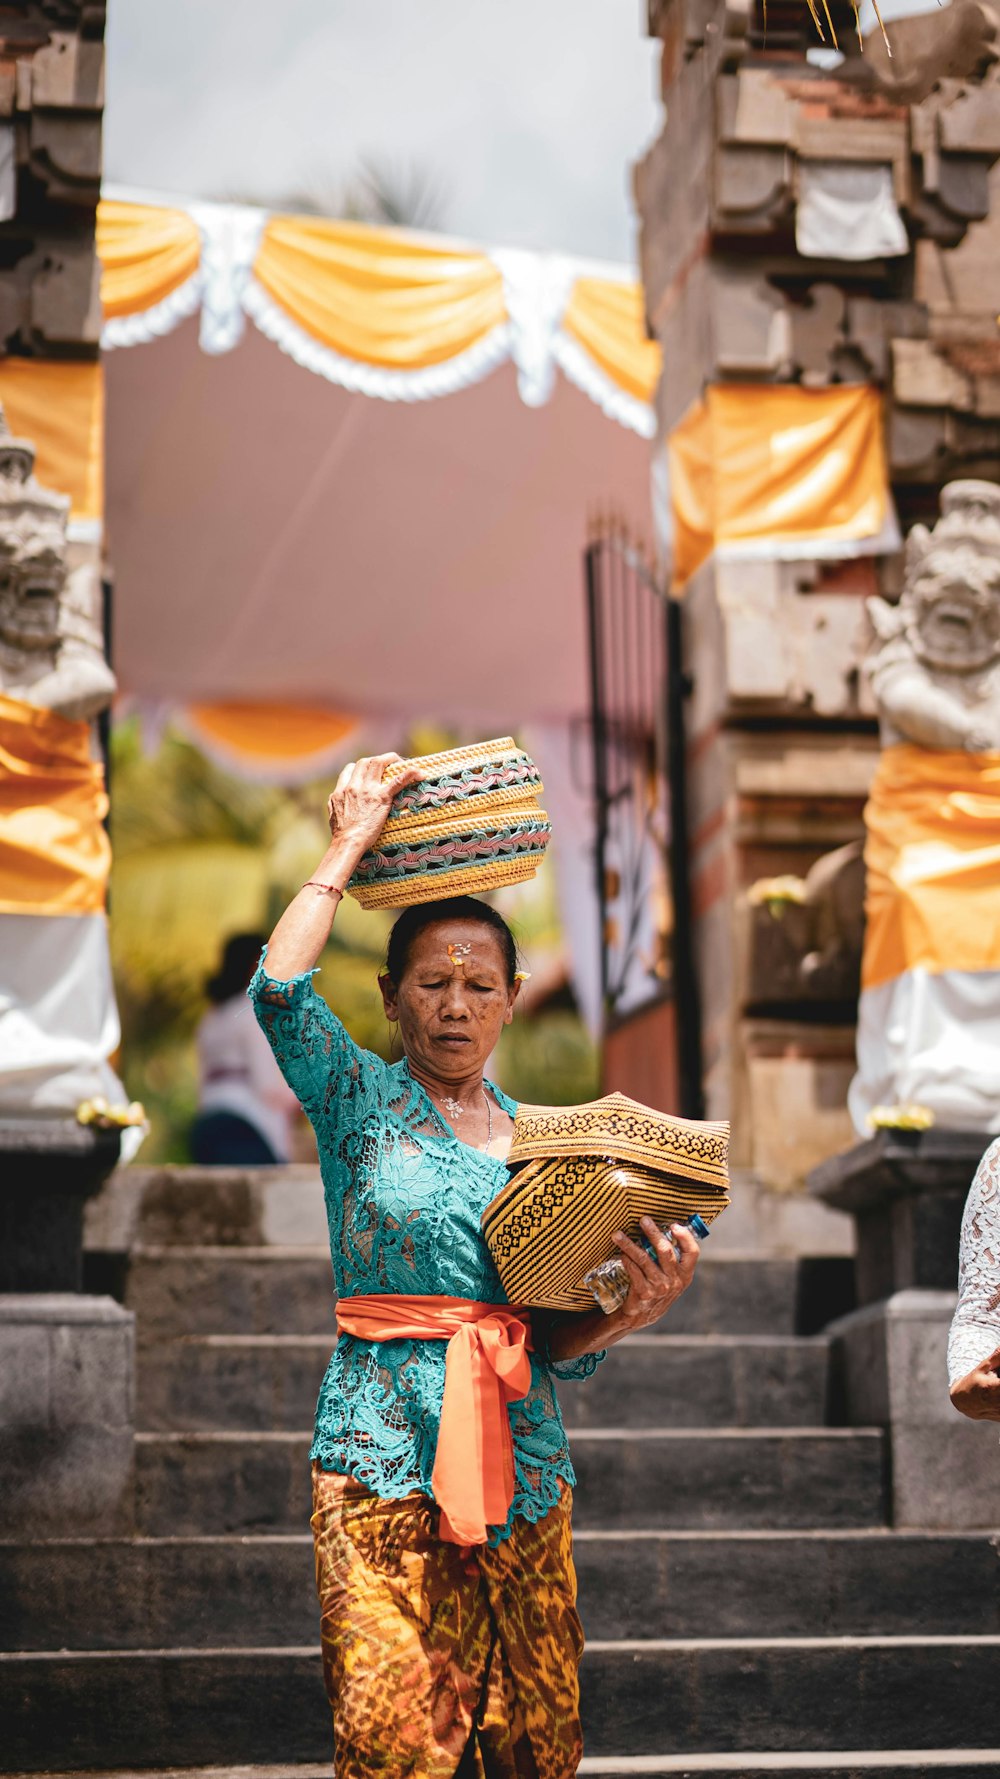 a woman carrying a basket on her head